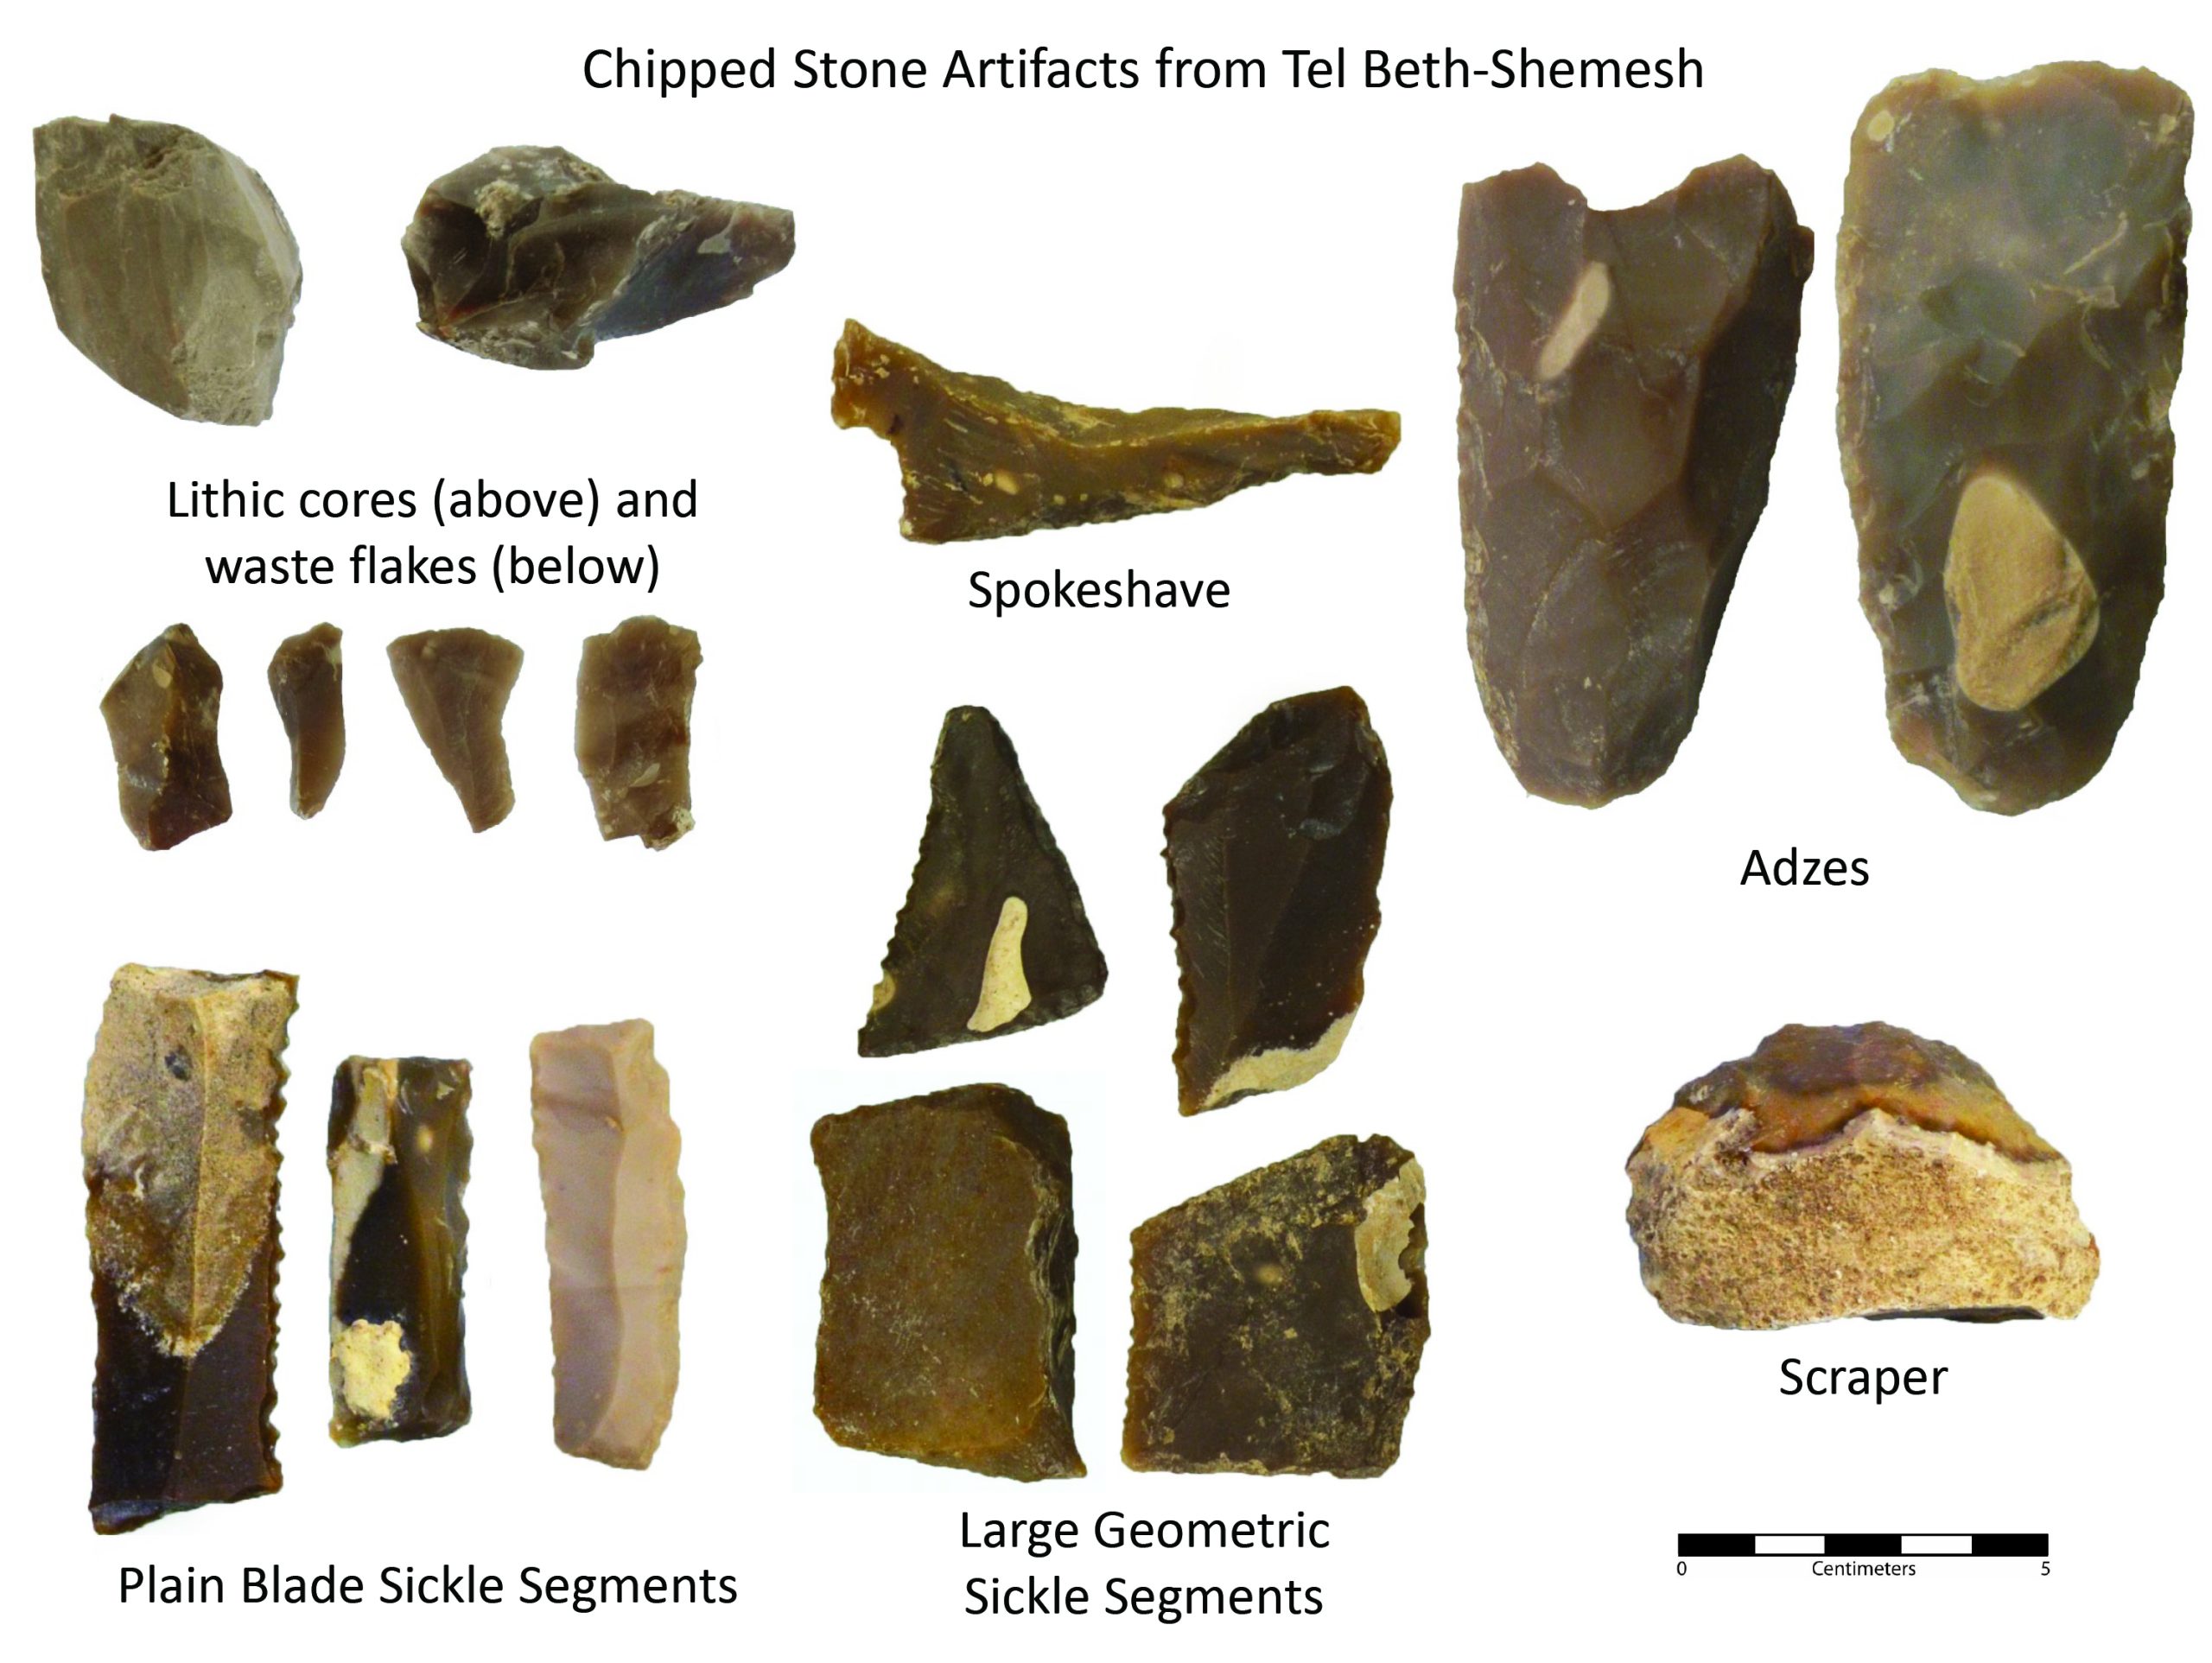 Selection of chipped stone artifacts excavated from Tel Beth-Shemesh (figure by S. Bubel.)